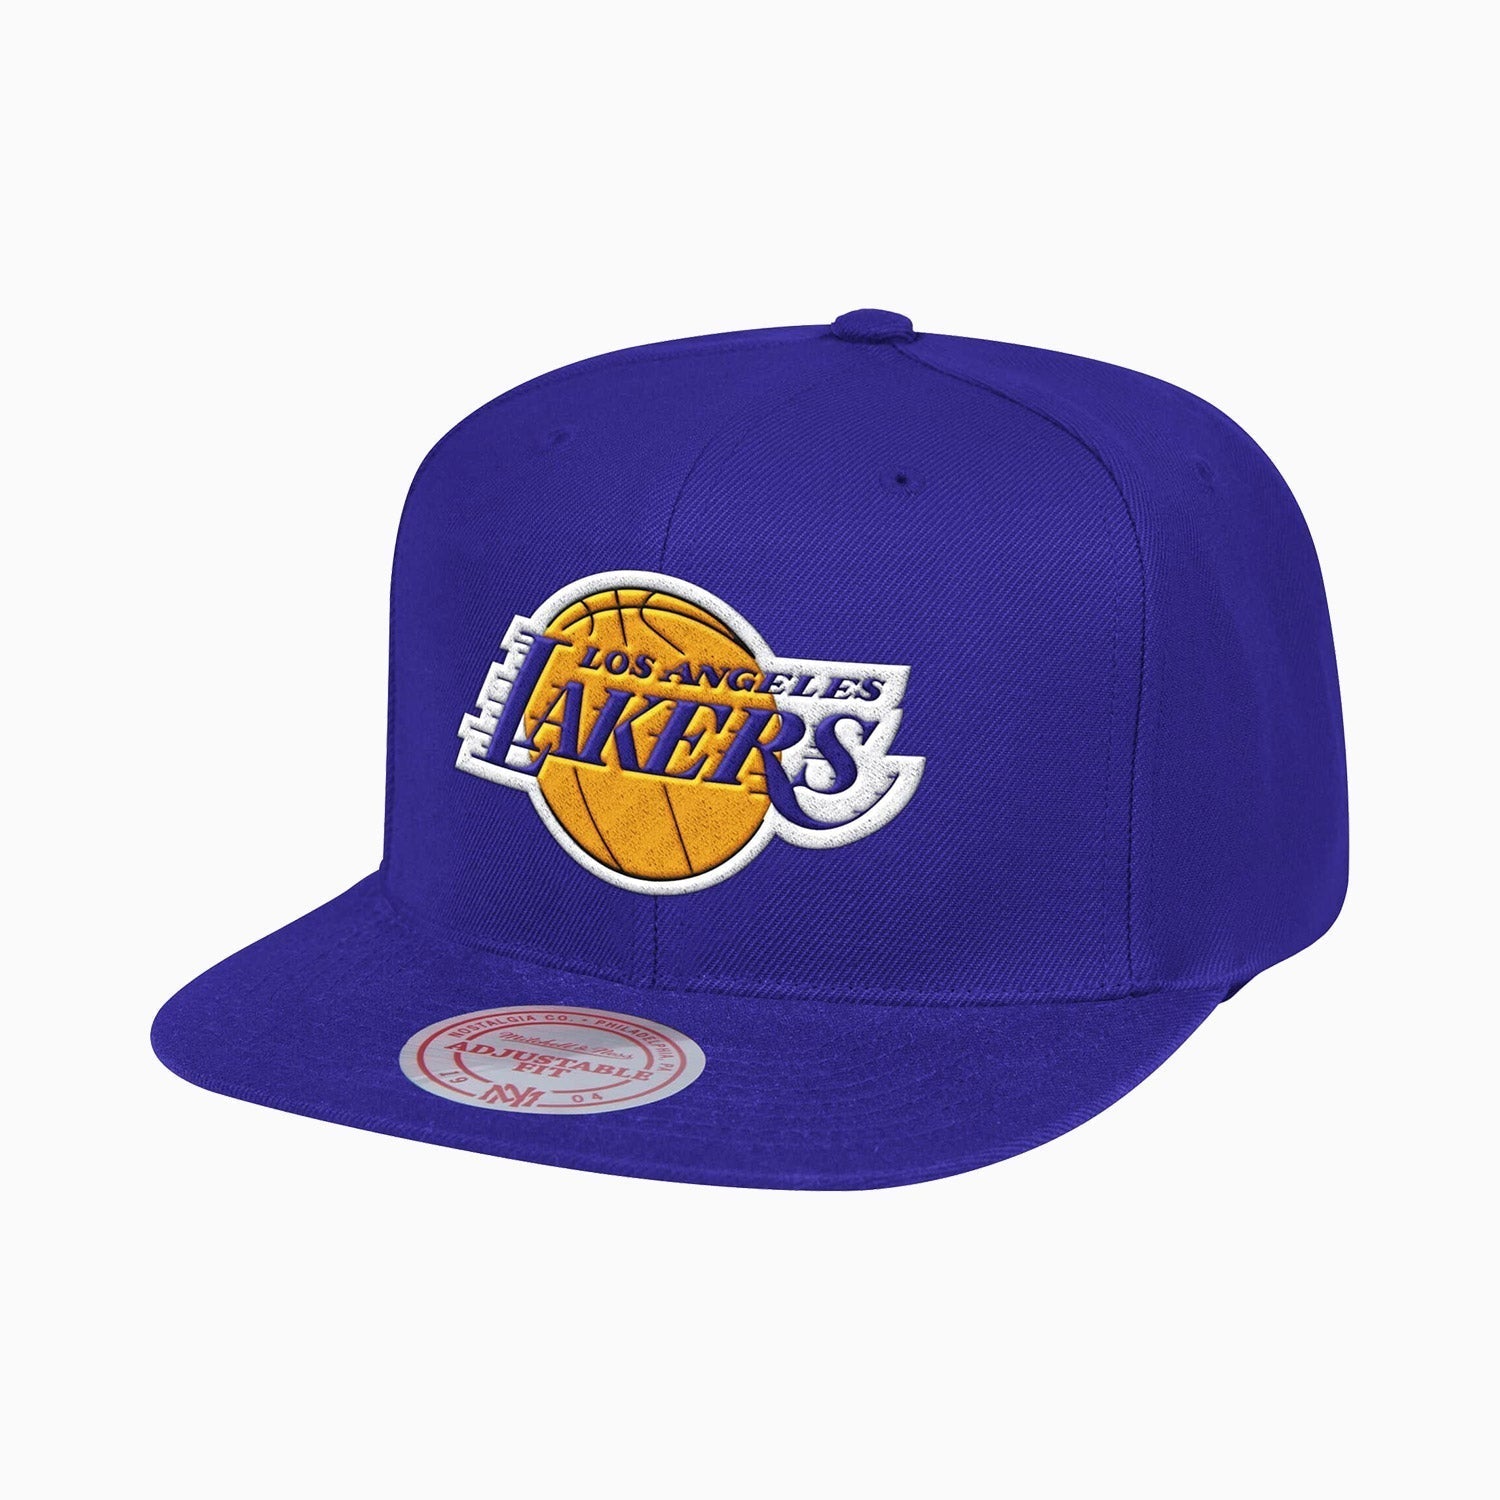 mitchell-and-ness-los-angeles-lakers-nba-snapback-hat-6hssmm18842-lalpurp